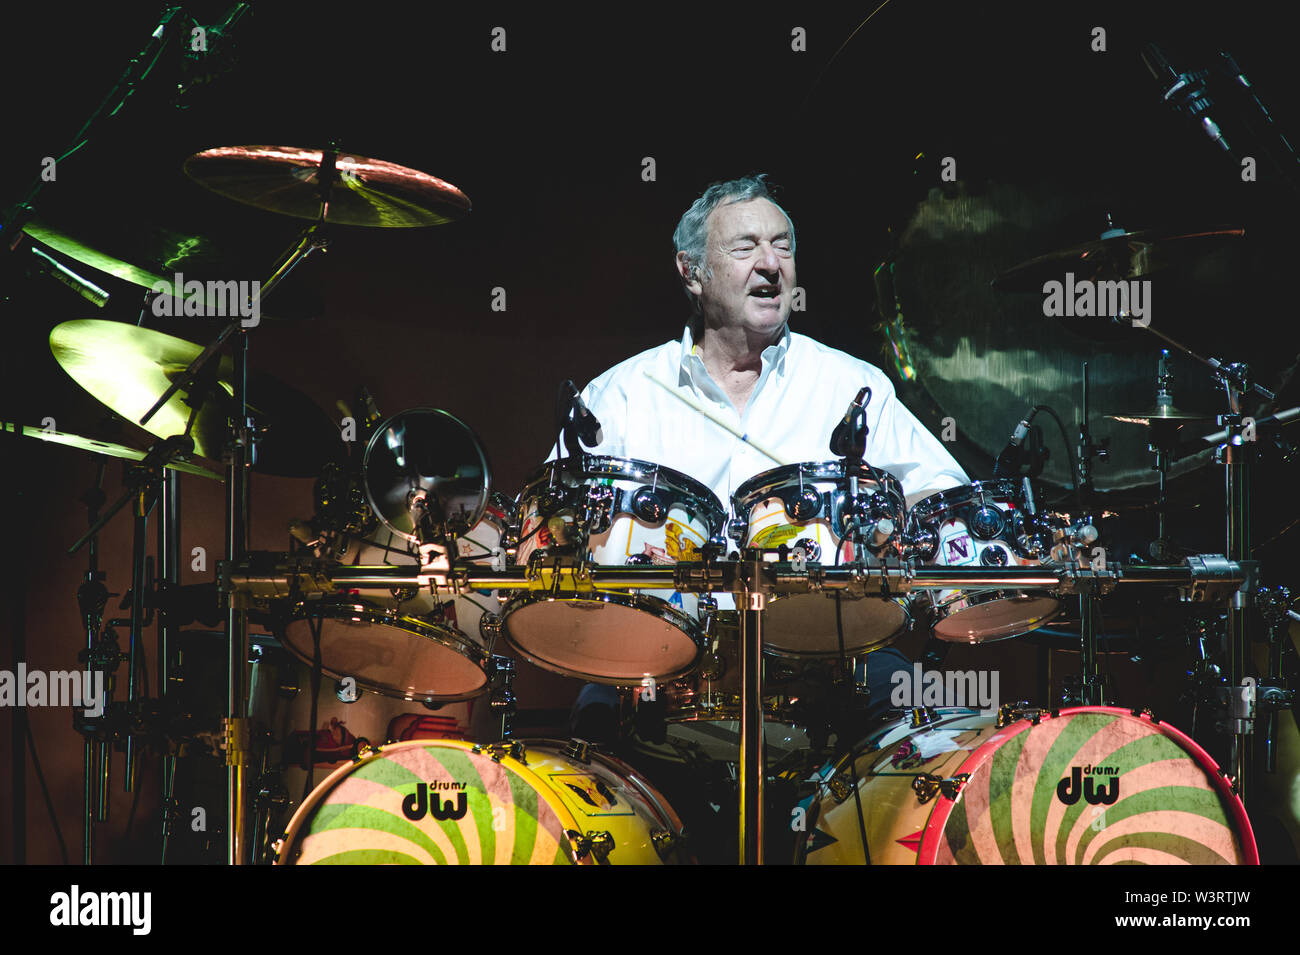 Roma, Italy. 16th July, 2019. Nick Mason's Saucerful Of Secrets, the band led by Pink Floyd drummer, on tour this summer in Italy.Nick Mason's Saucerful Of Secrets are formed by Nick Mason, Gary Kemp, Guy Pratt, Lee Harris and Dom Beken. The concerts celebrate the first Pink Floyd musical works and include songs taken from the albums 'The Piper At The Gates of Dawn' and 'A Saucerful Of Secrets'. Credit: Fabrizio Di Bitonto/Pacific Press/Alamy Live News Stock Photo